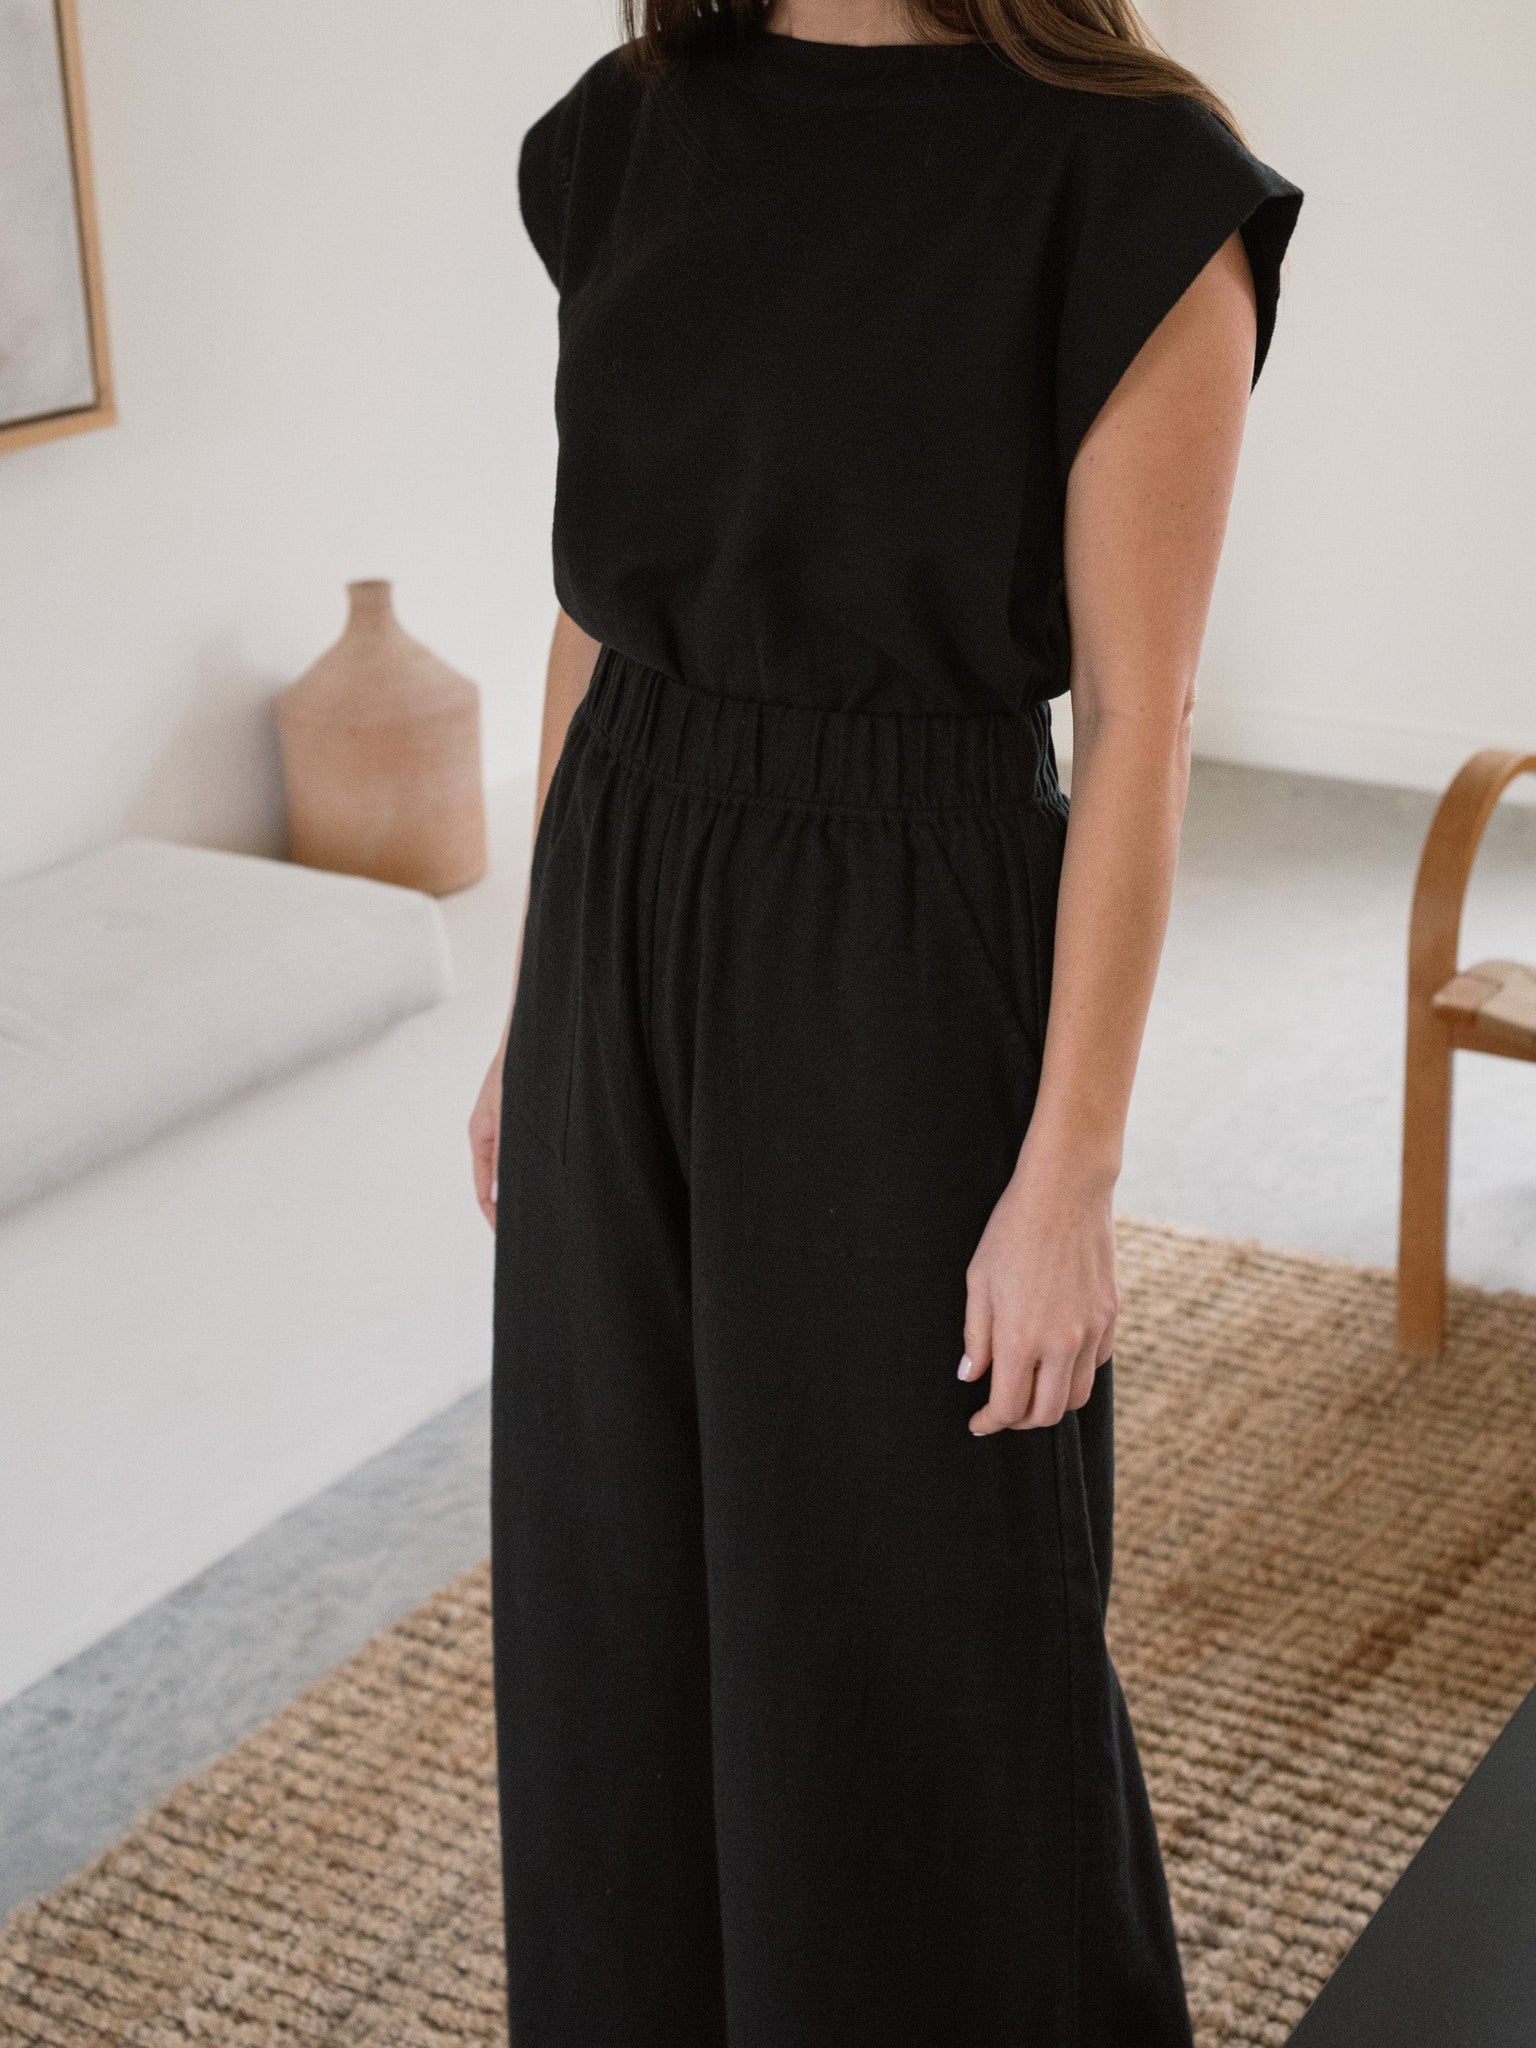 A woman standing in a living room wearing the Everyday Crop Pant - Black.